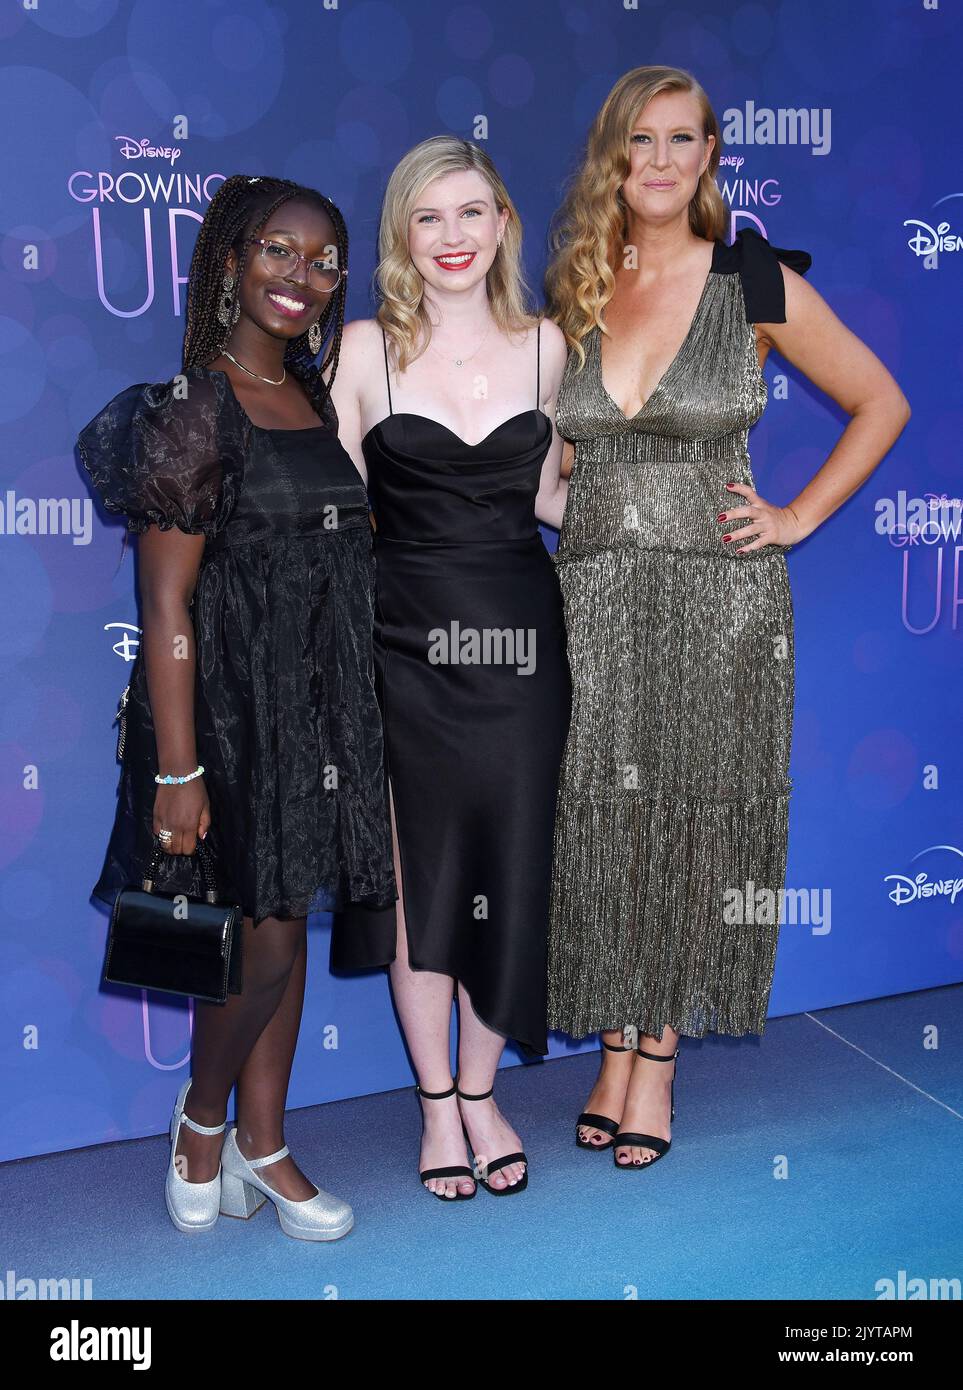 Sofia Ongele, Alex Crotty and Nicole Galovski arriving to the 'Growing Up' Premiere held at Neuehouse Hollywood on September 7, 2022 Hollywood, California © Janet Gough / AFF-USA.com Stock Photo